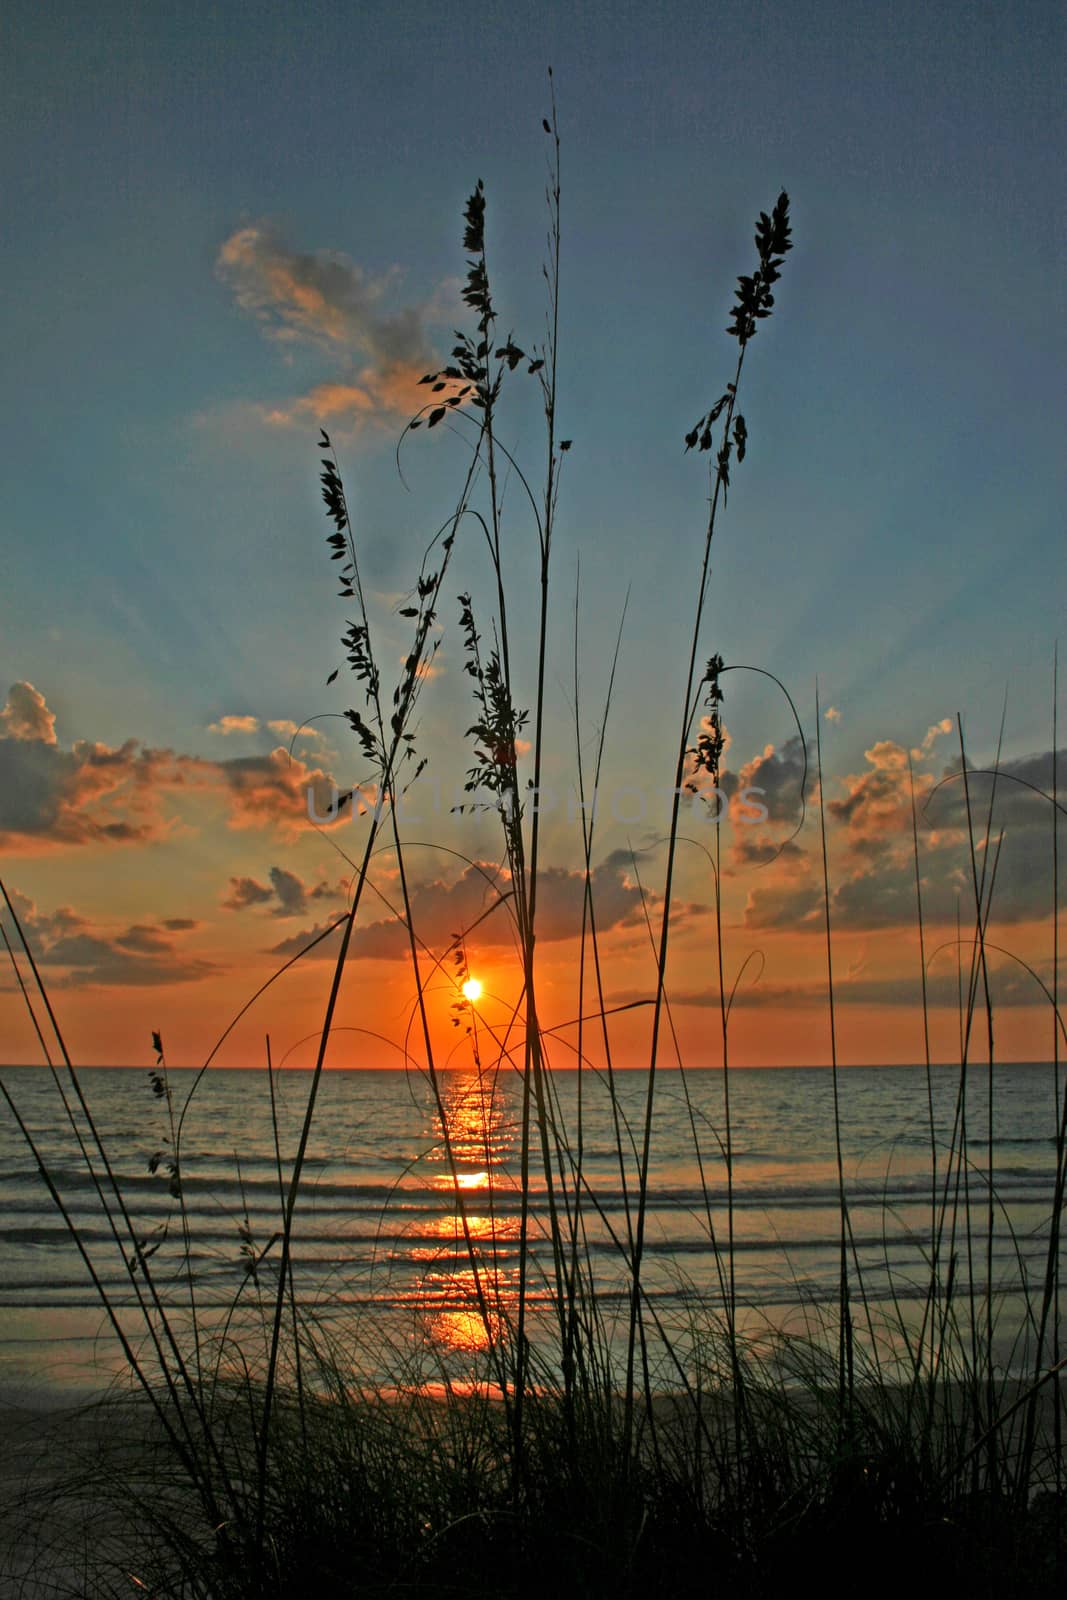 Some reeds with sunset over the ocean